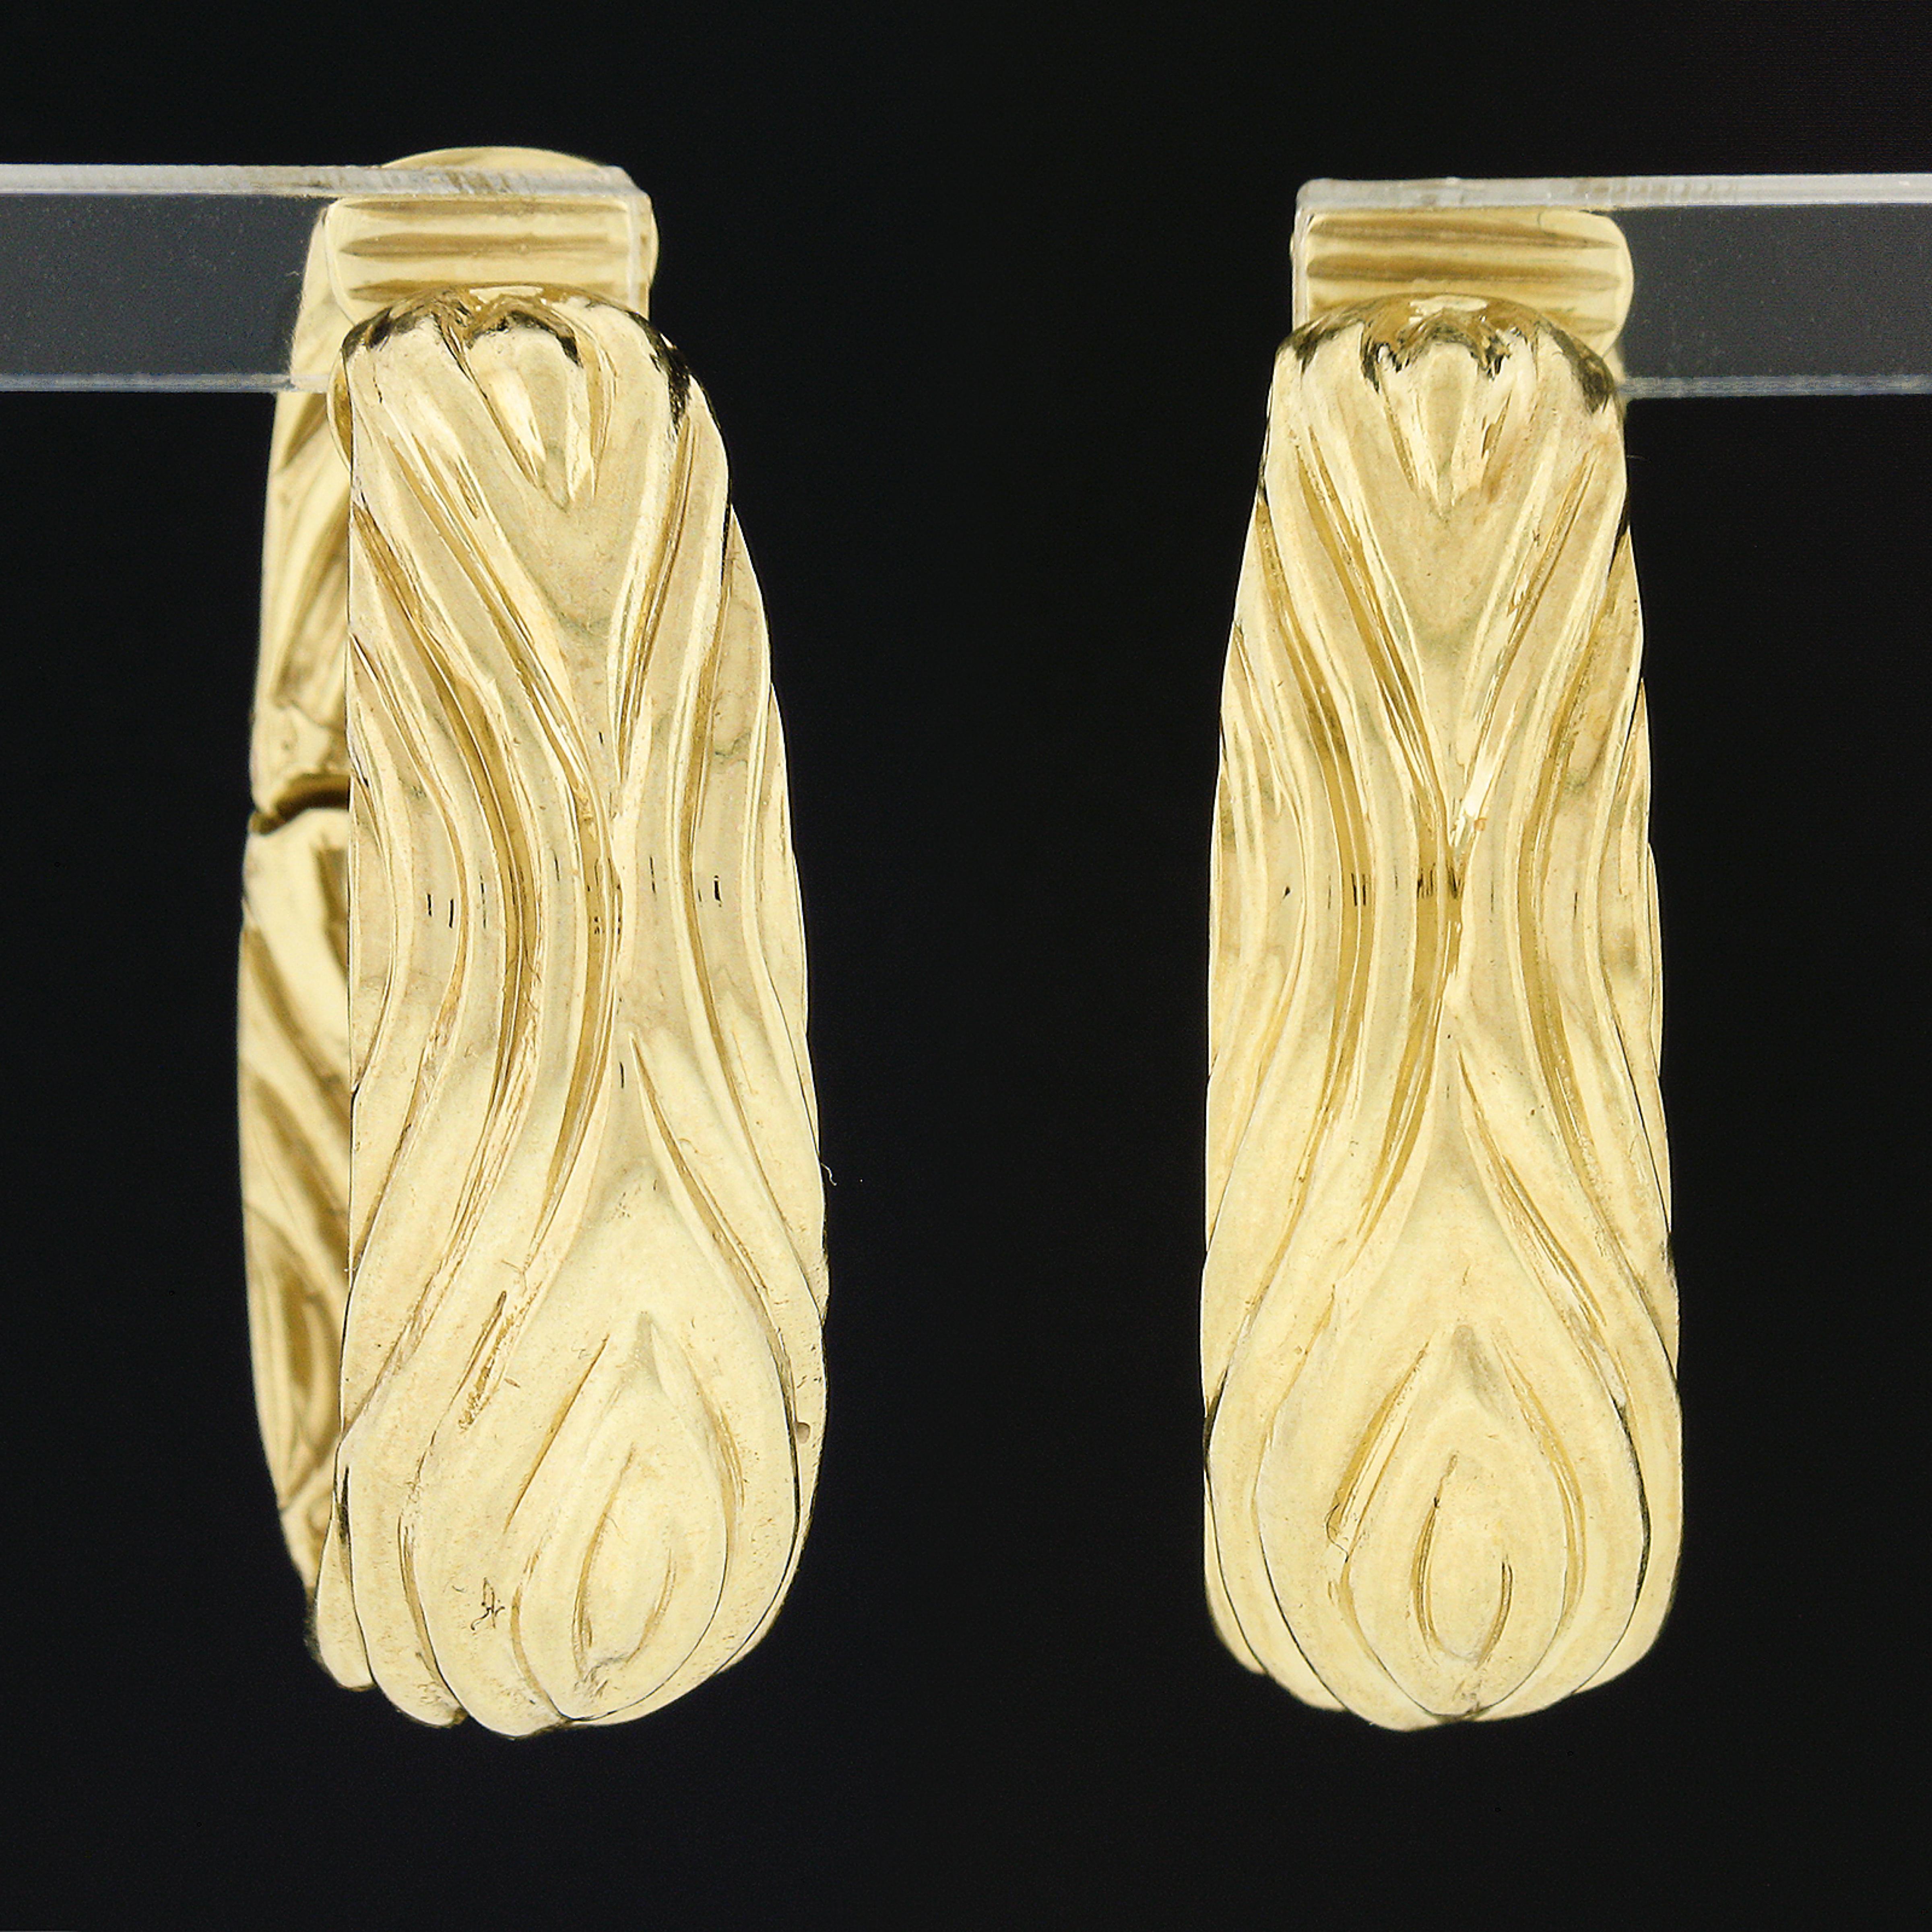 Here we have an absolutely elegant pair of hoop/huggie earrings that is crafted from solid 18k yellow gold. These bold oval shaped hoops feature a lovely sculpted pattern that gives the pair their wonderful textured look, in which runs entirely